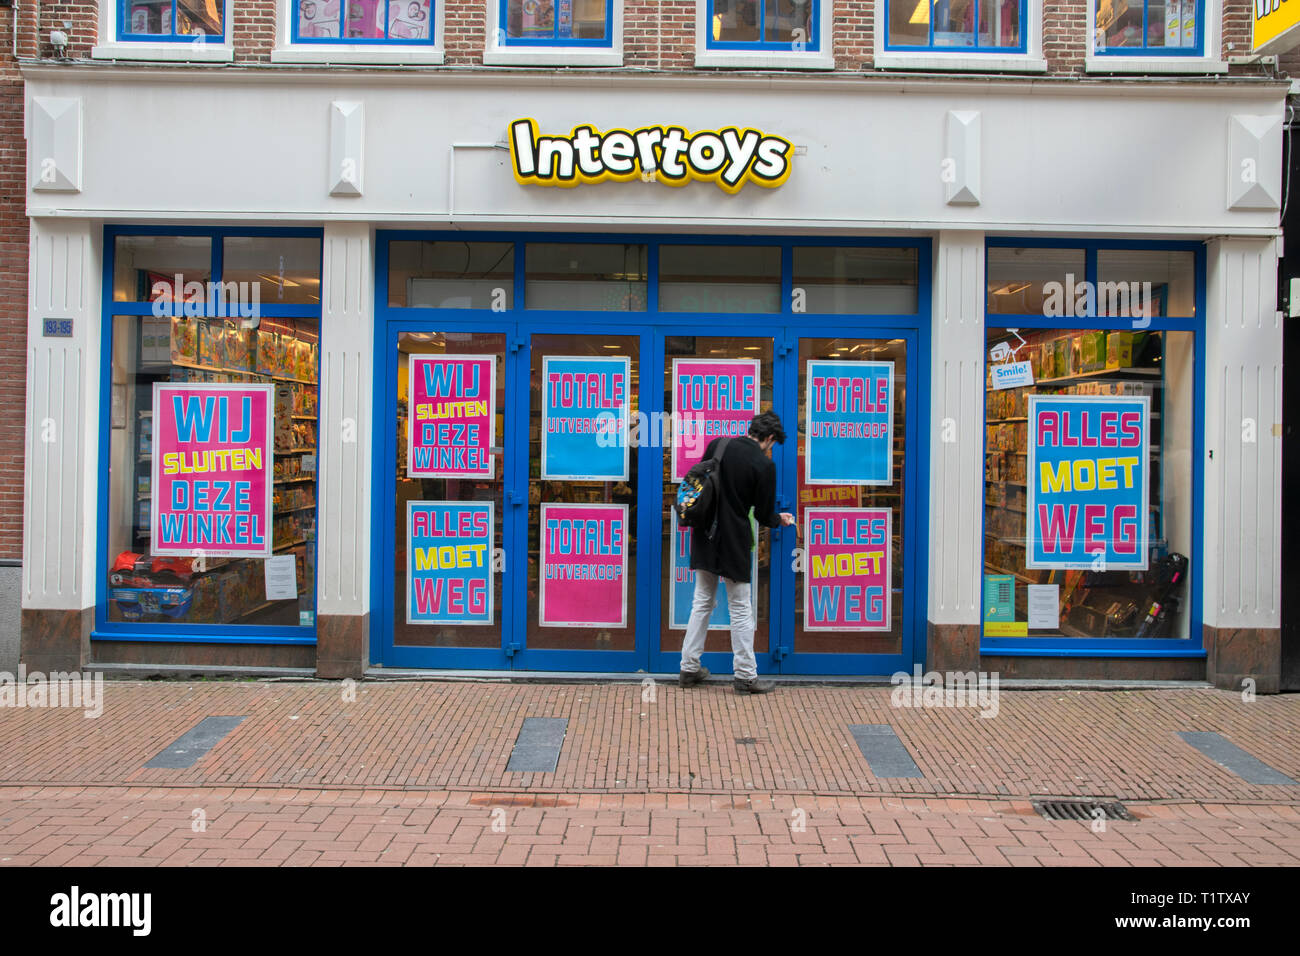 Professor Aanval aanvulling Intertoys Toy Store Bankrupt At Amsterdam The Netherlands 2019 Stock Photo  - Alamy